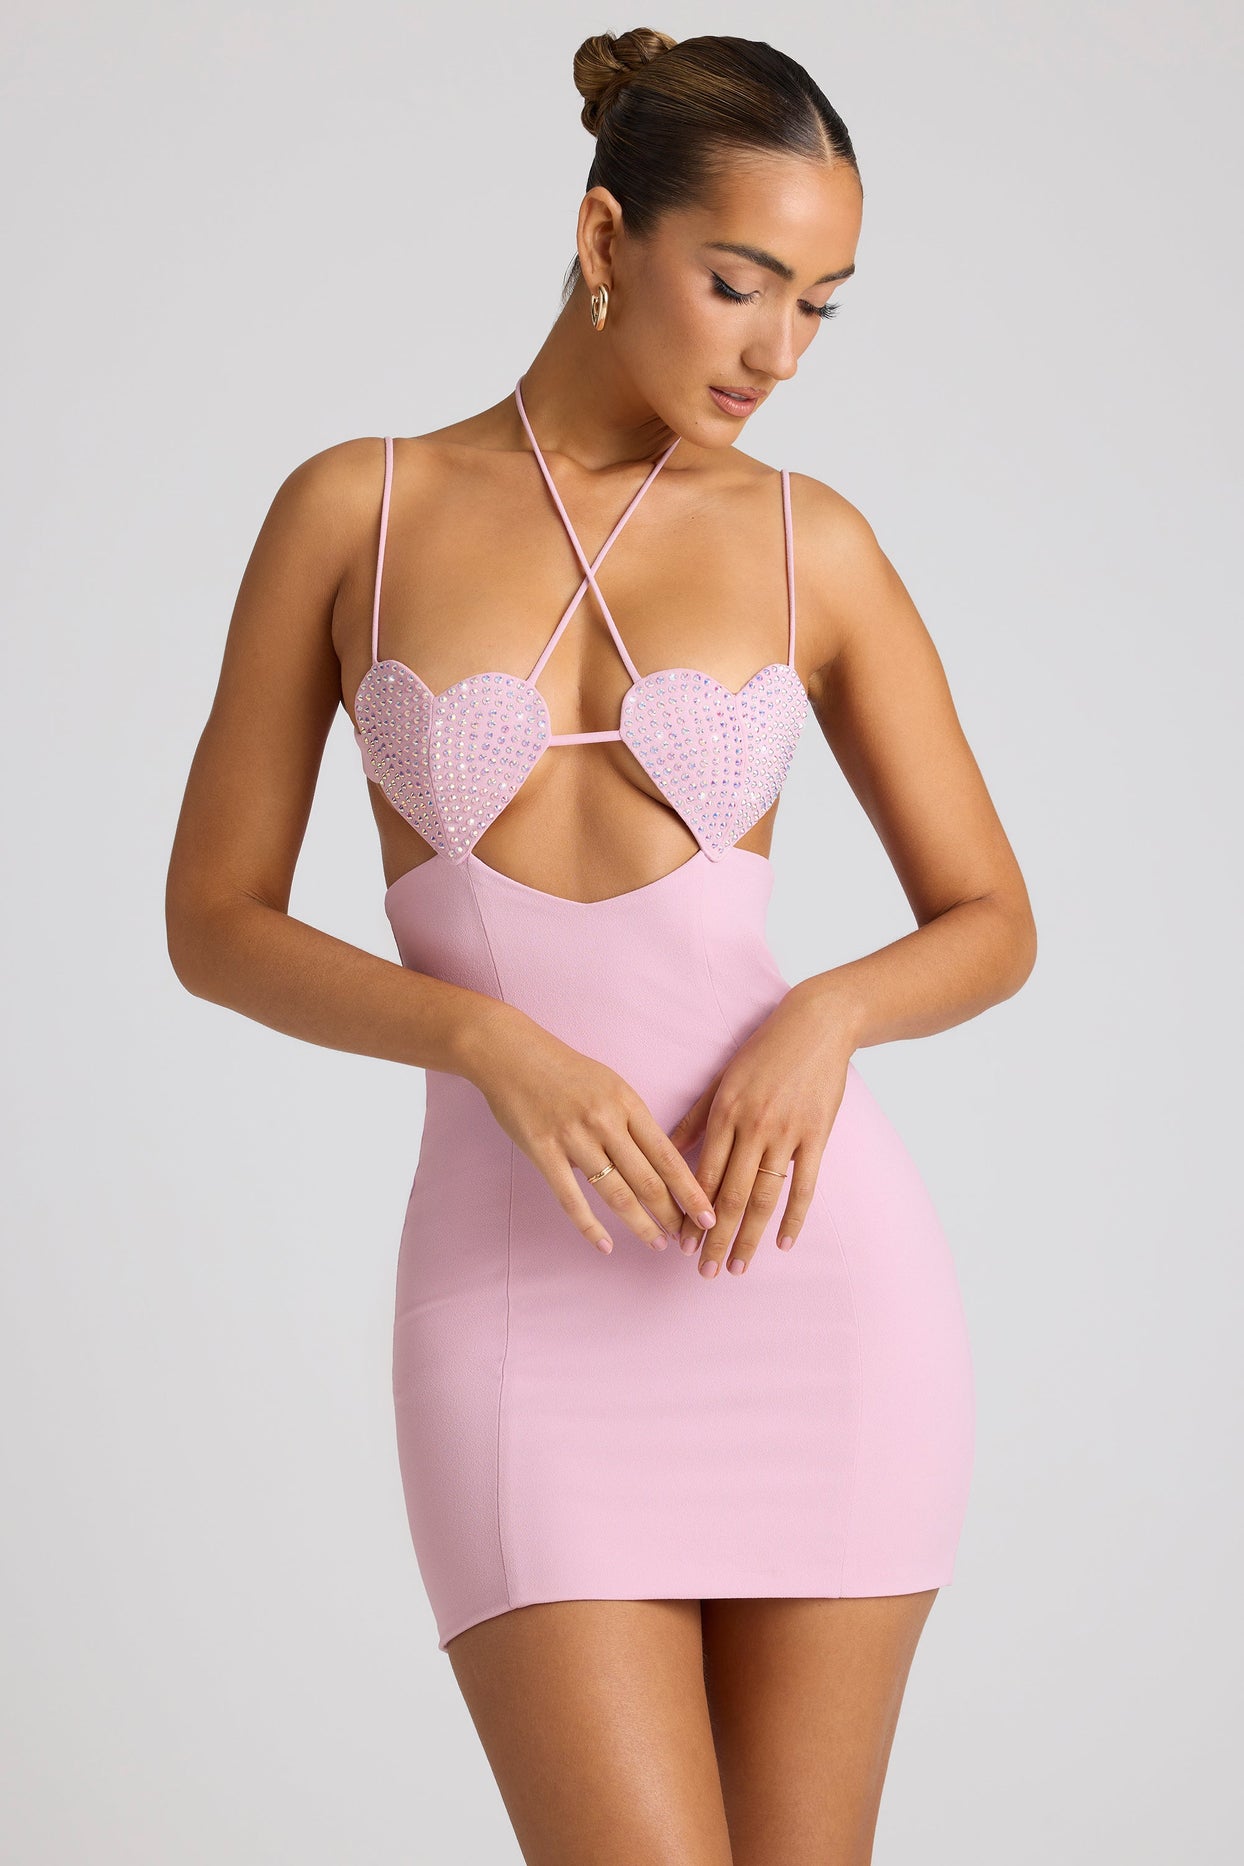 Embellished Heart Cup Detail Mini Dress in Soft Pink